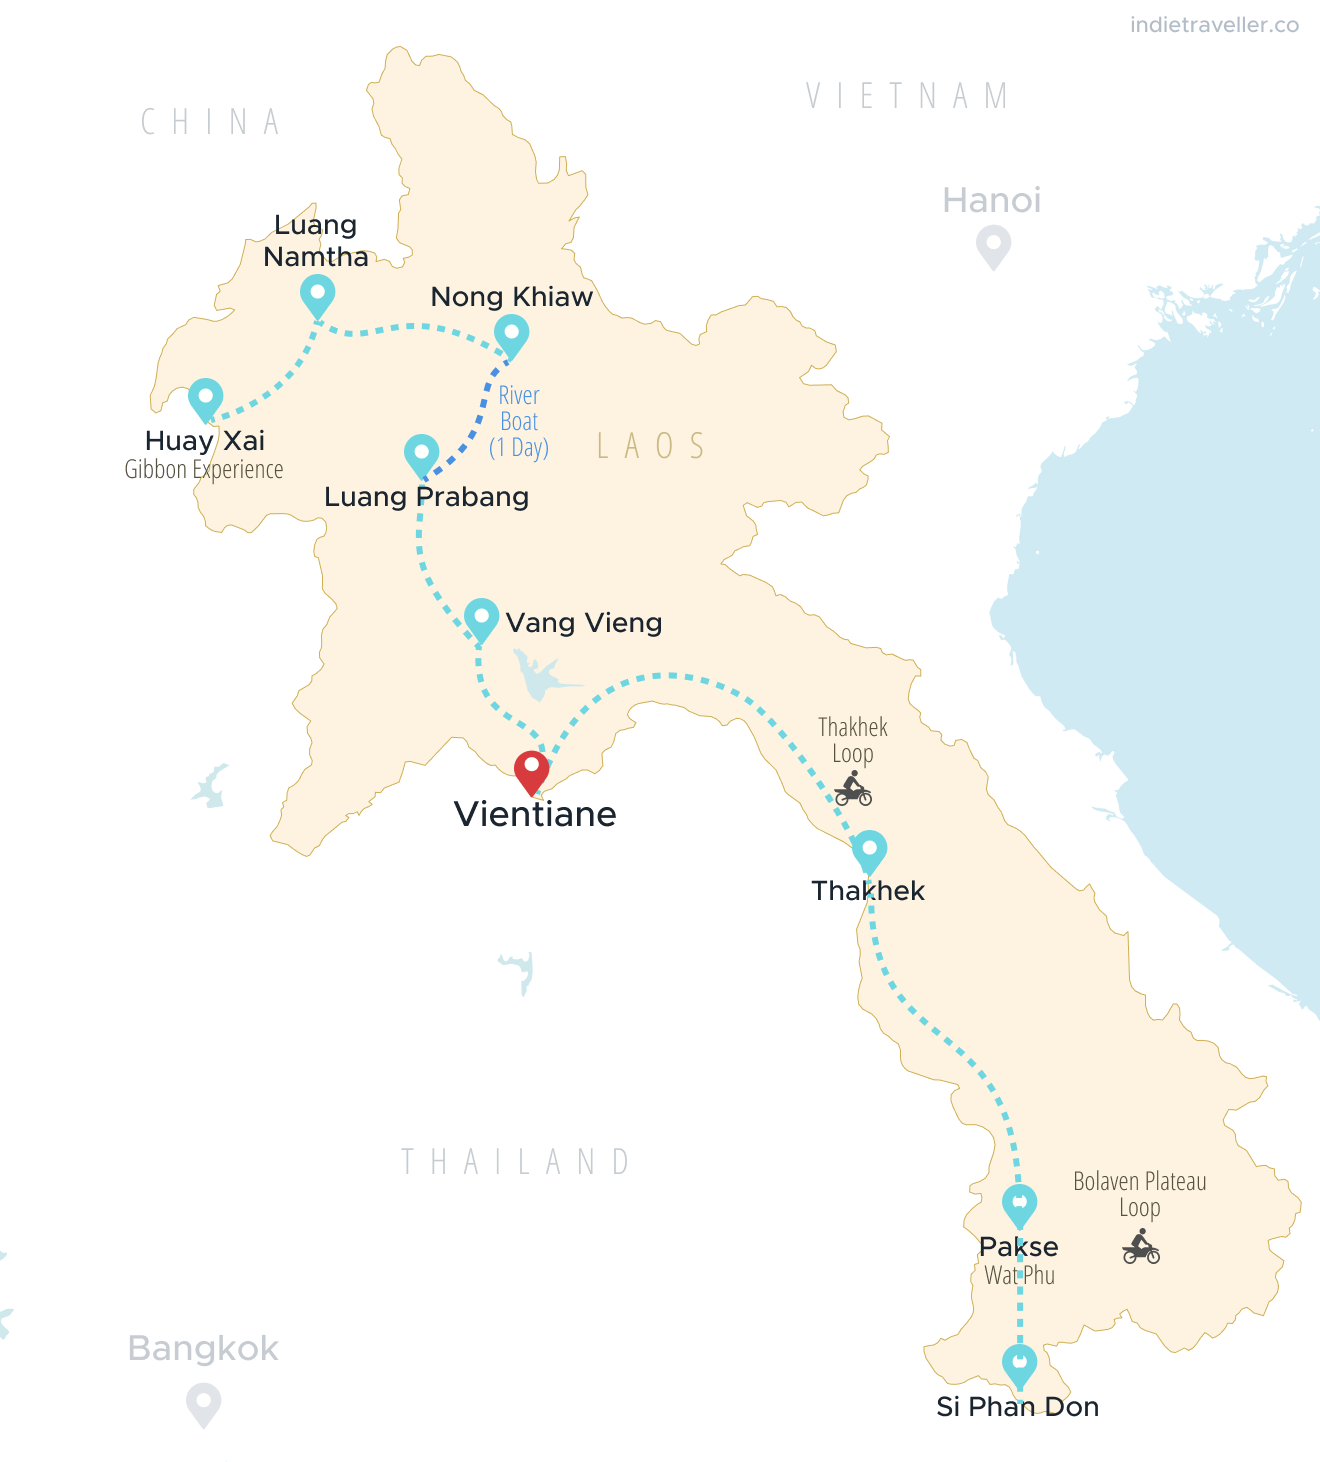 Map of Laos showing a 3 week itinerary, with a route starting in Huay Xai in the north and ending in Si Phan Don in the sotuh.